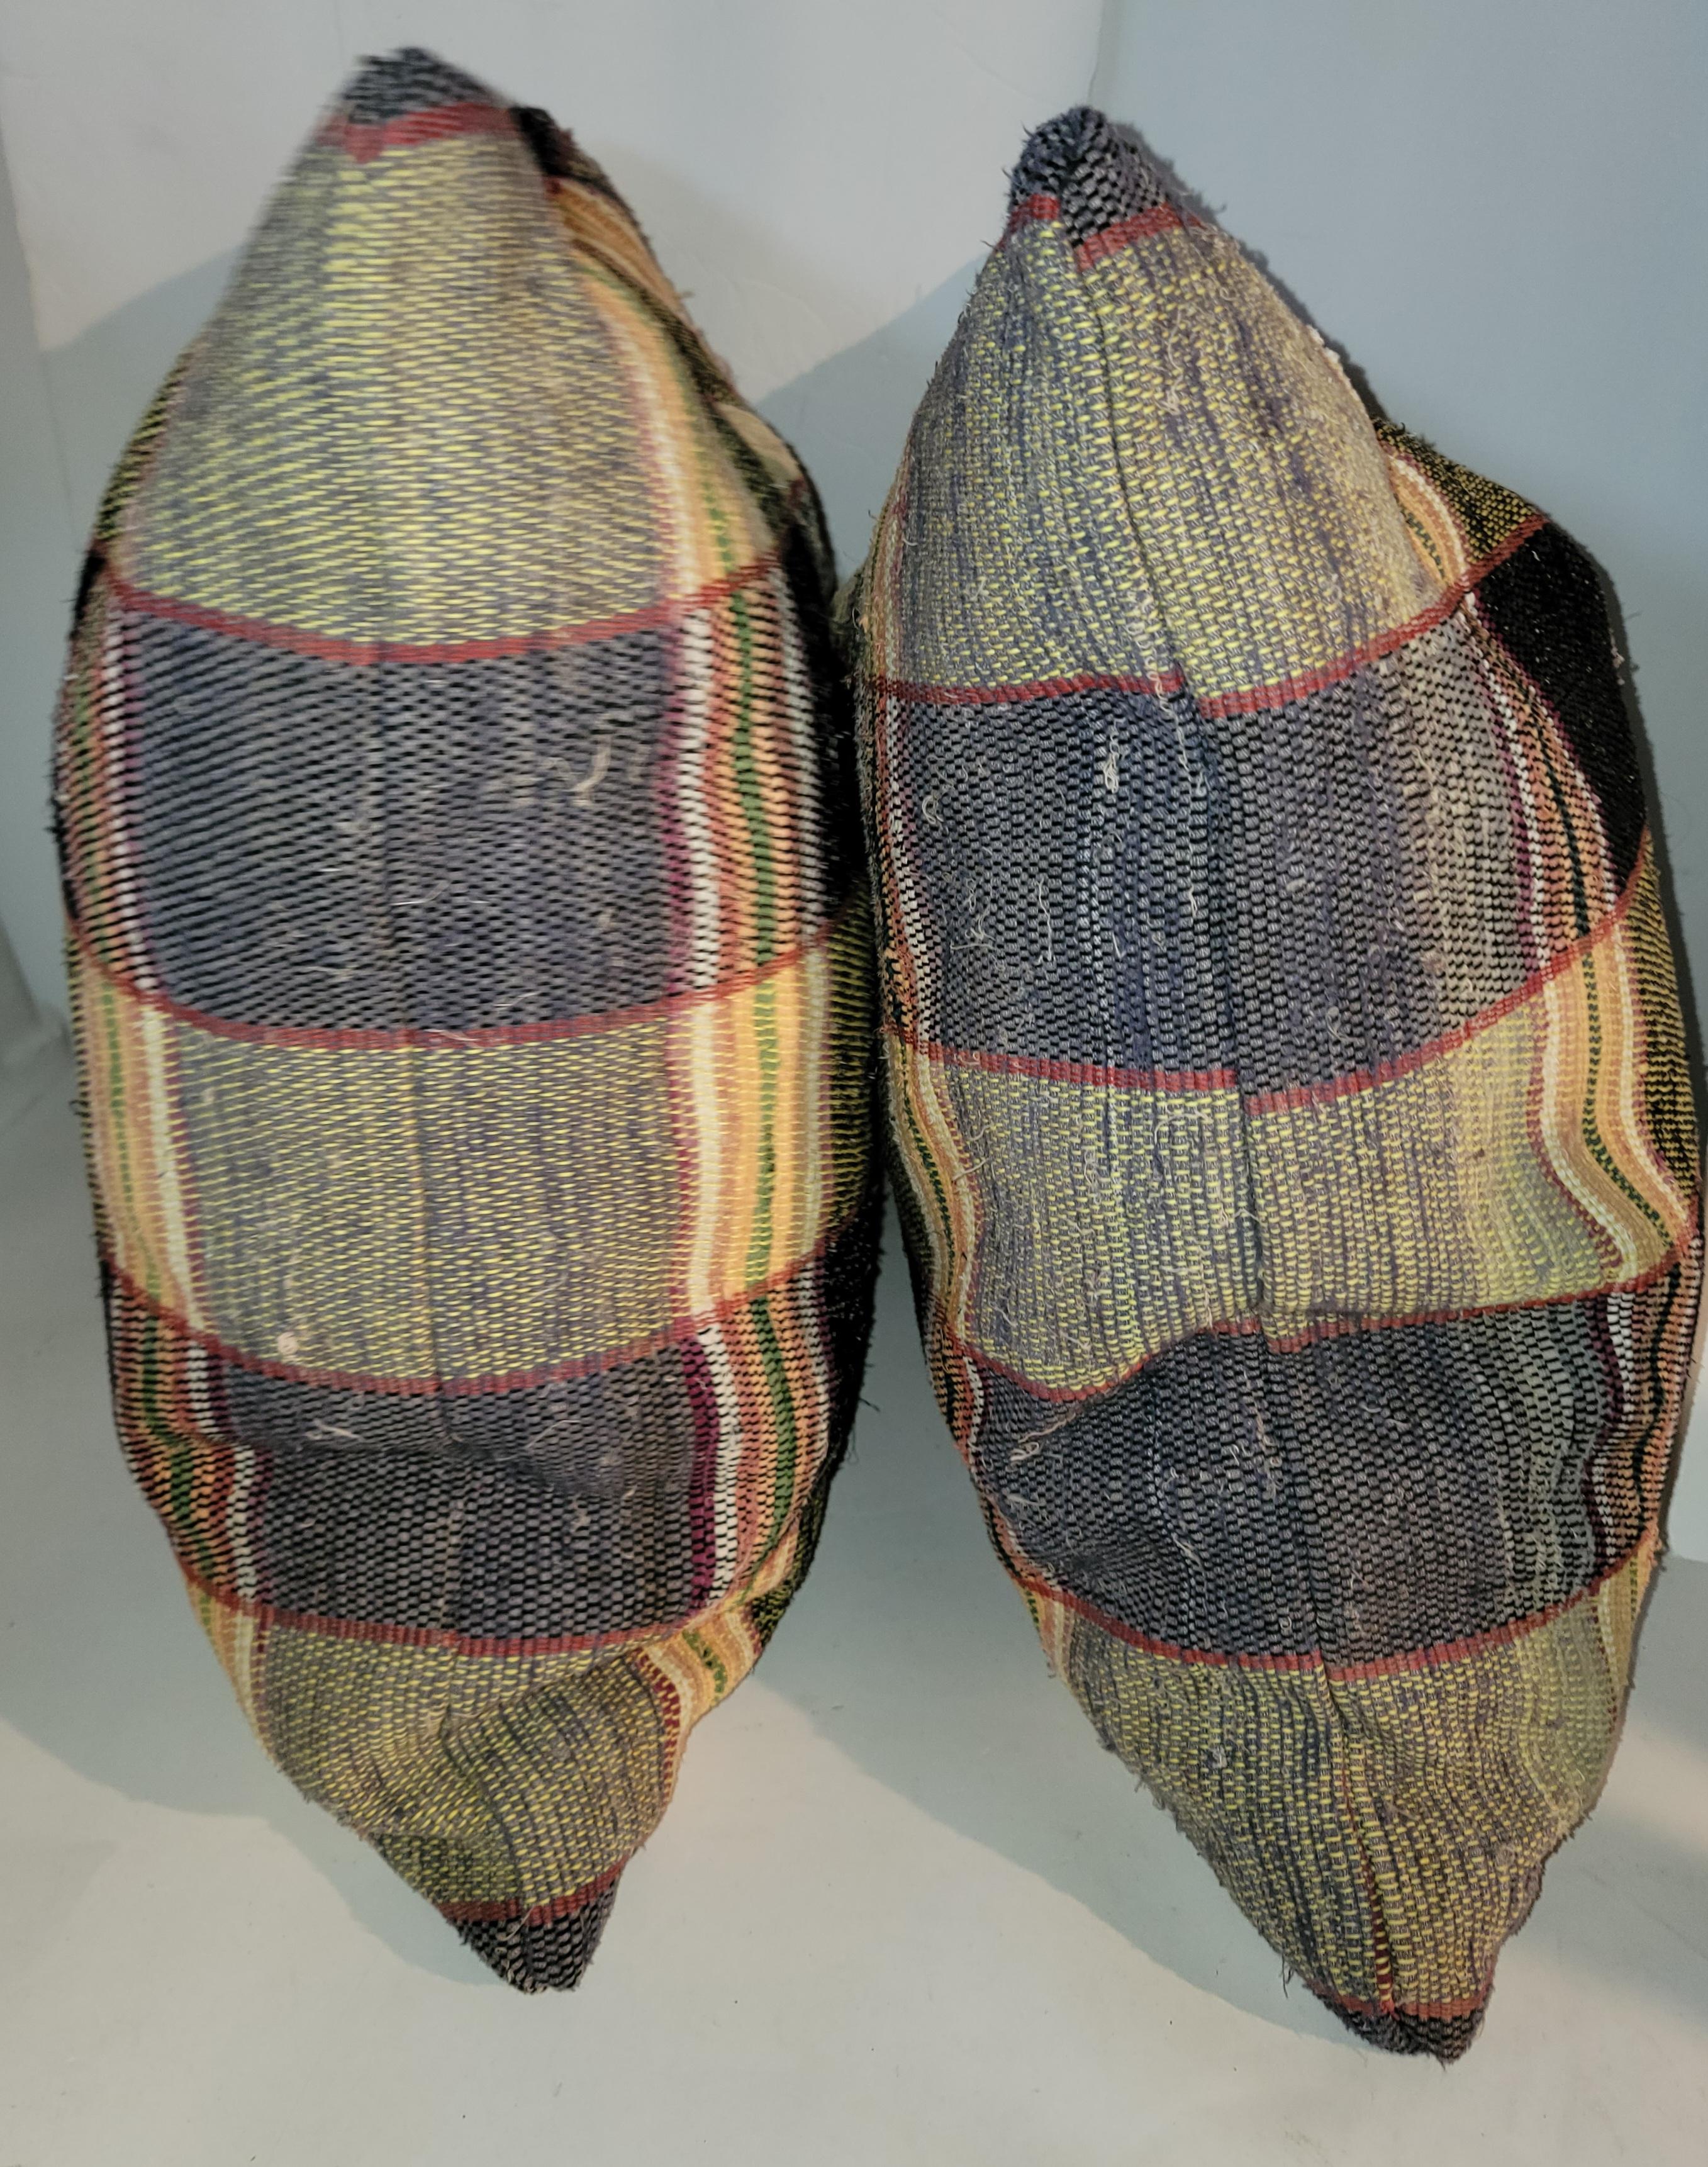 Early 20thc pair of RagRug pillows from New England.